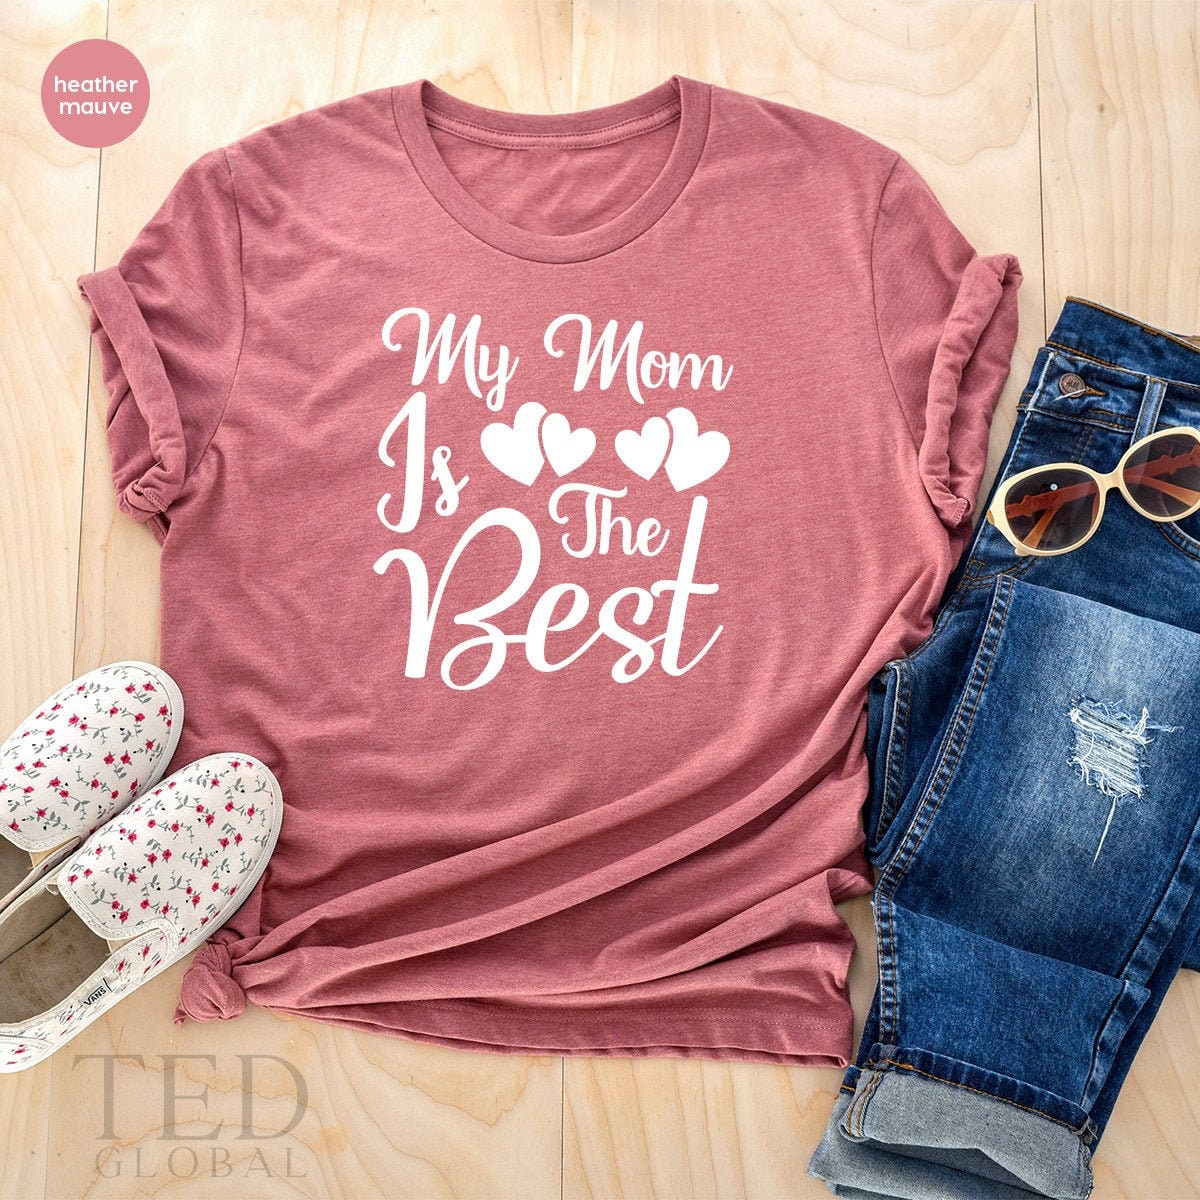 Best Mom TShirt, Mama T Shirt, Mommy T-Shirt, Cute Mom Shirt, Mothers Day Tee, Gift For Mama, My Mom IS The Best Shirts, Mama Birthday Gift - Fastdeliverytees.com